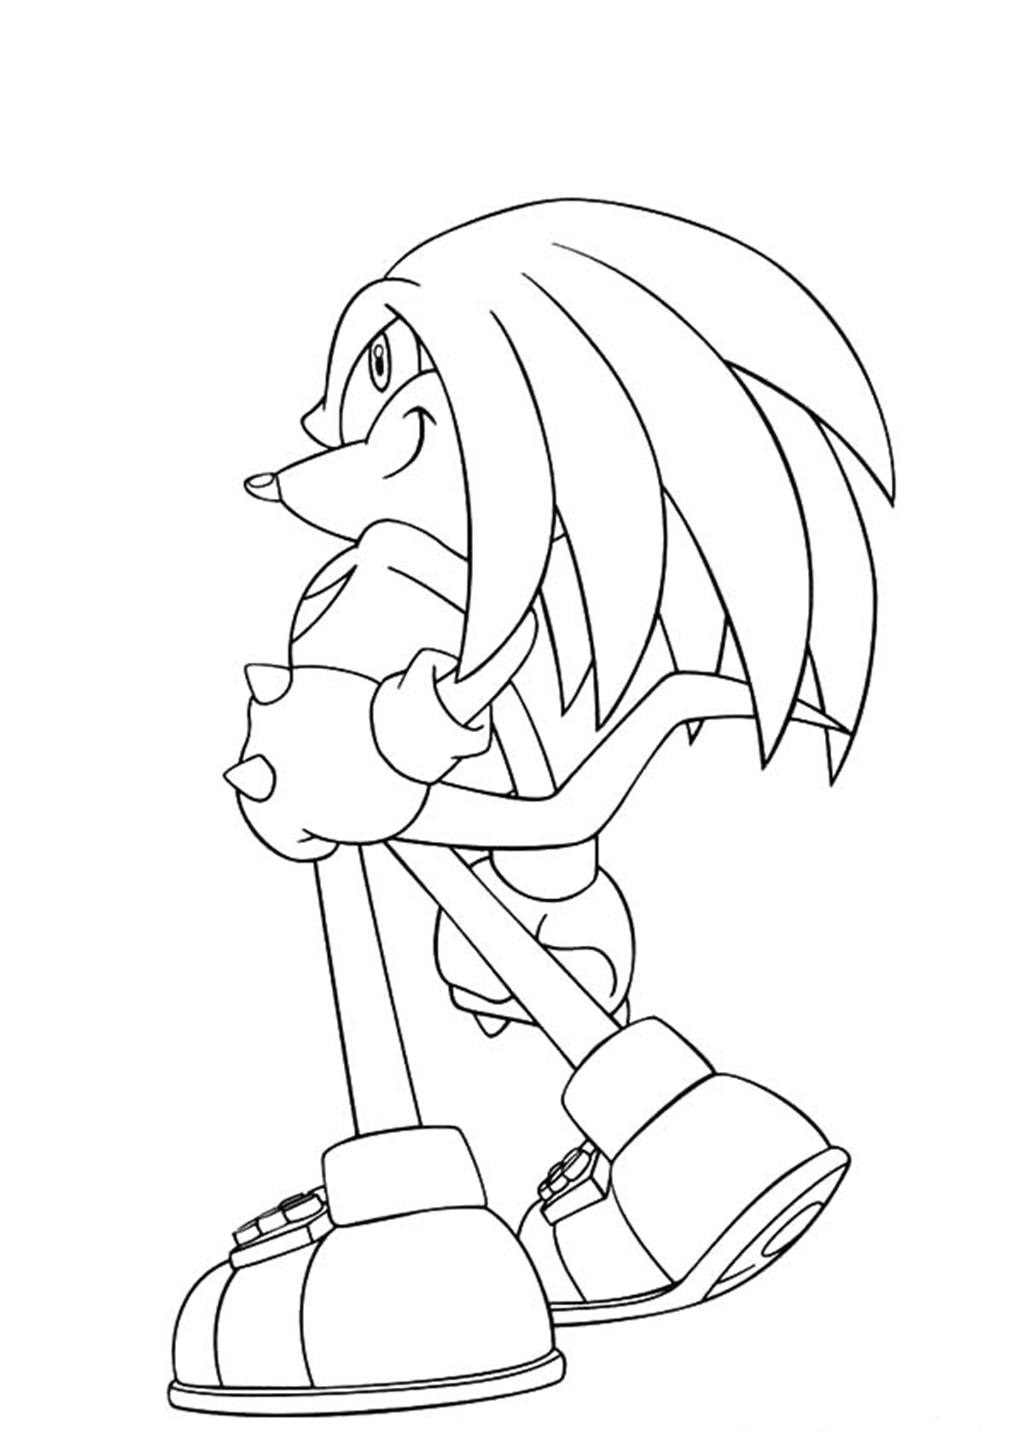 Knuckles The Echidna Coloring Pages from Sonic the Hedgehog